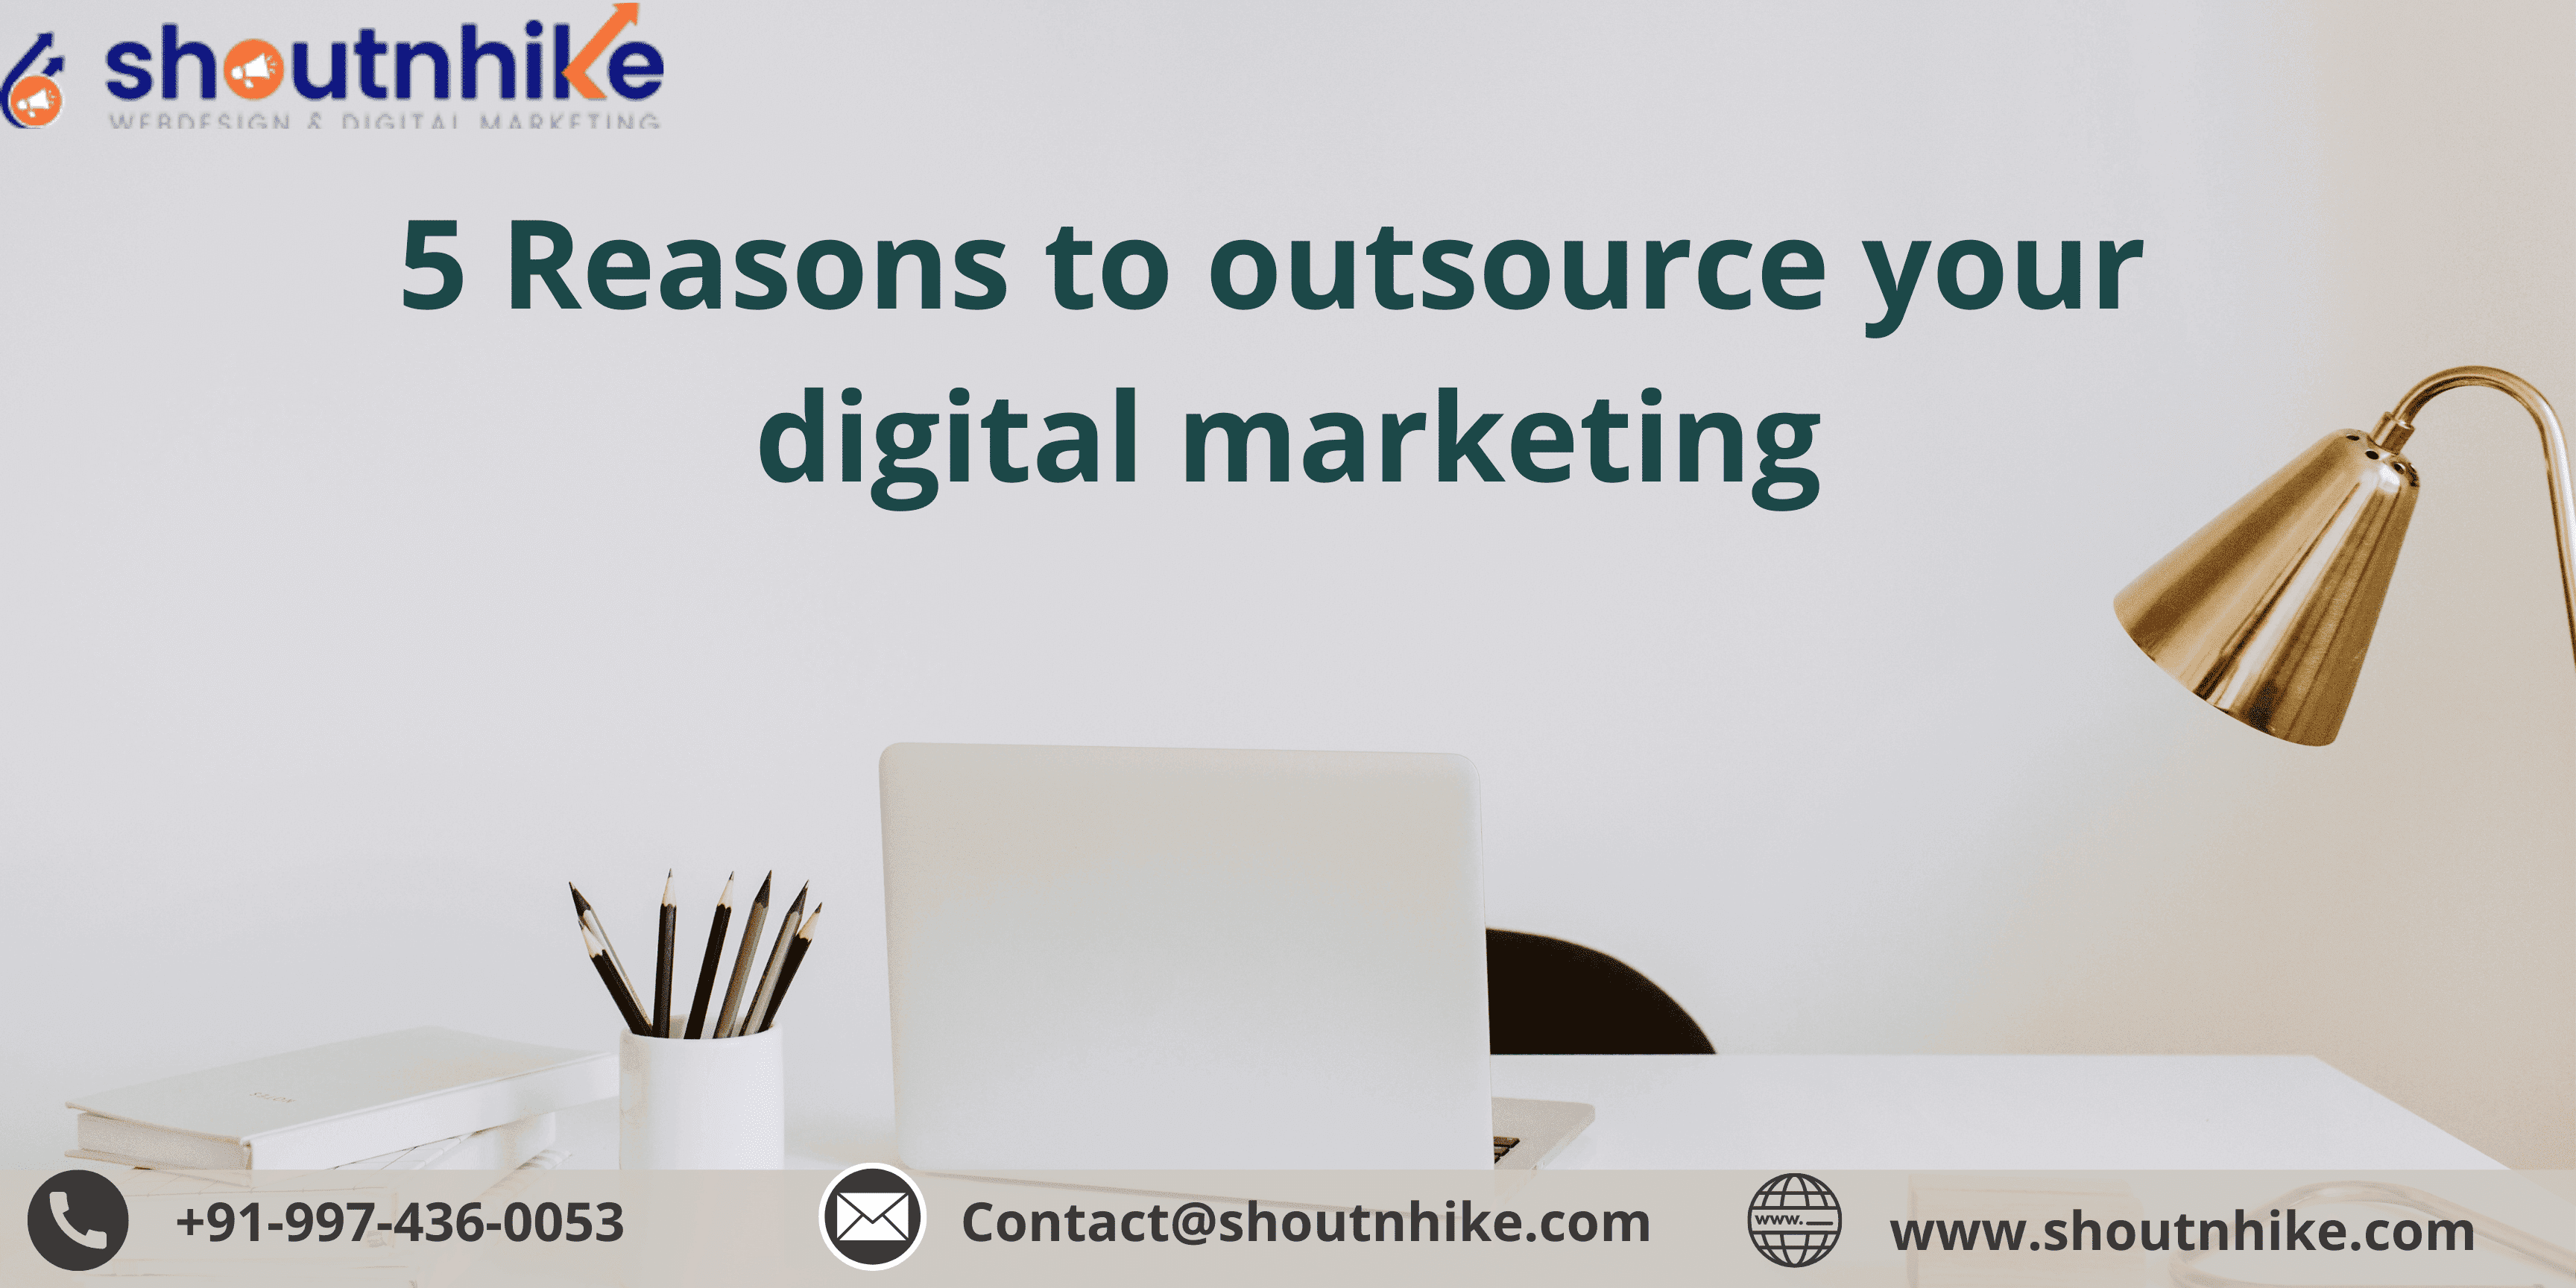 5 Reasons to outsource your digital marketing